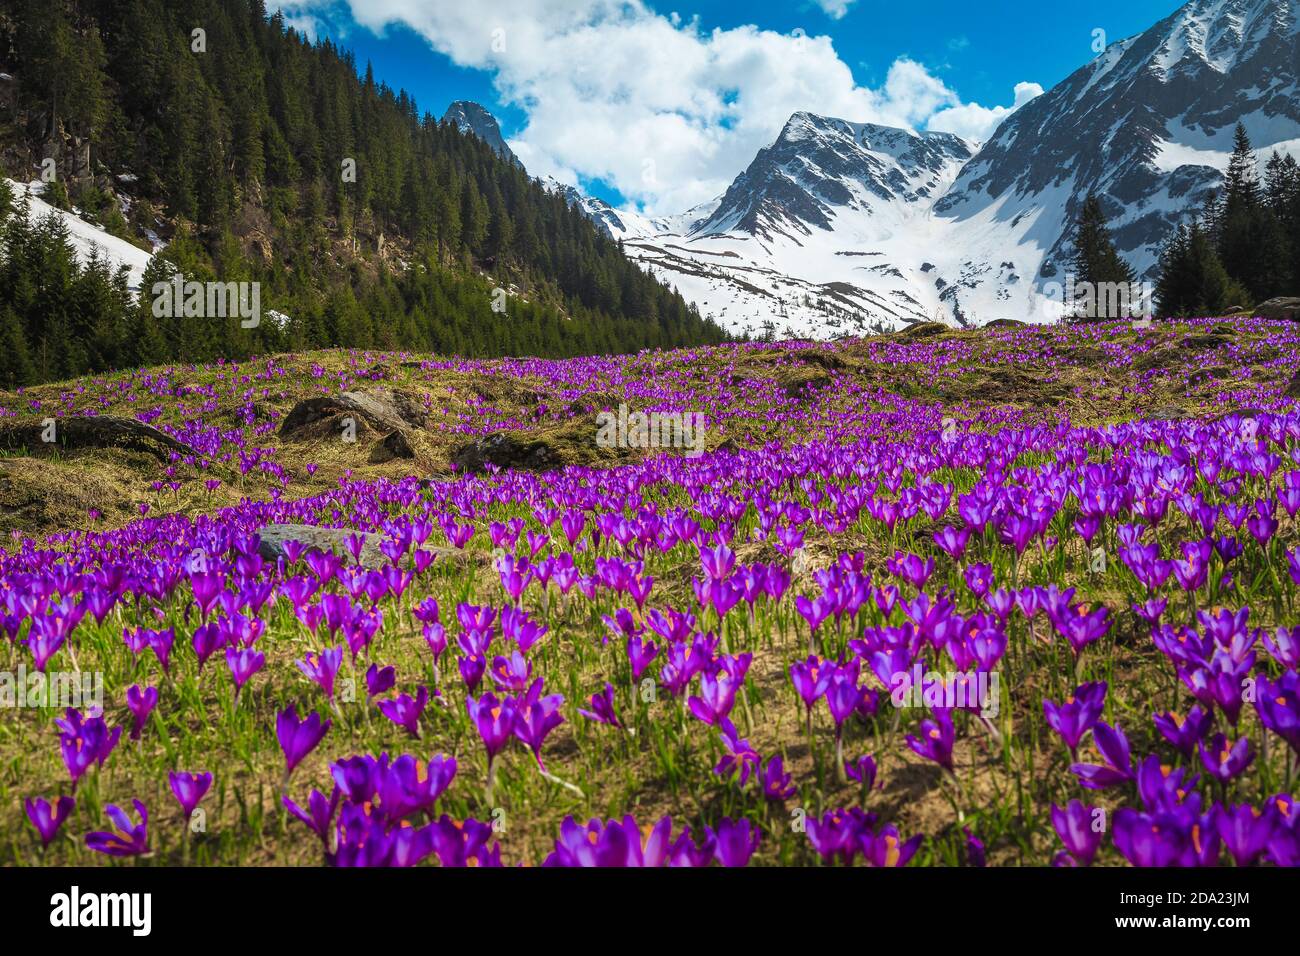 Beautiful spring landscape, majestic slopes with fresh colorful purple crocus flowers and high snowy mountains in background, Fagaras mountains, Carpa Stock Photo